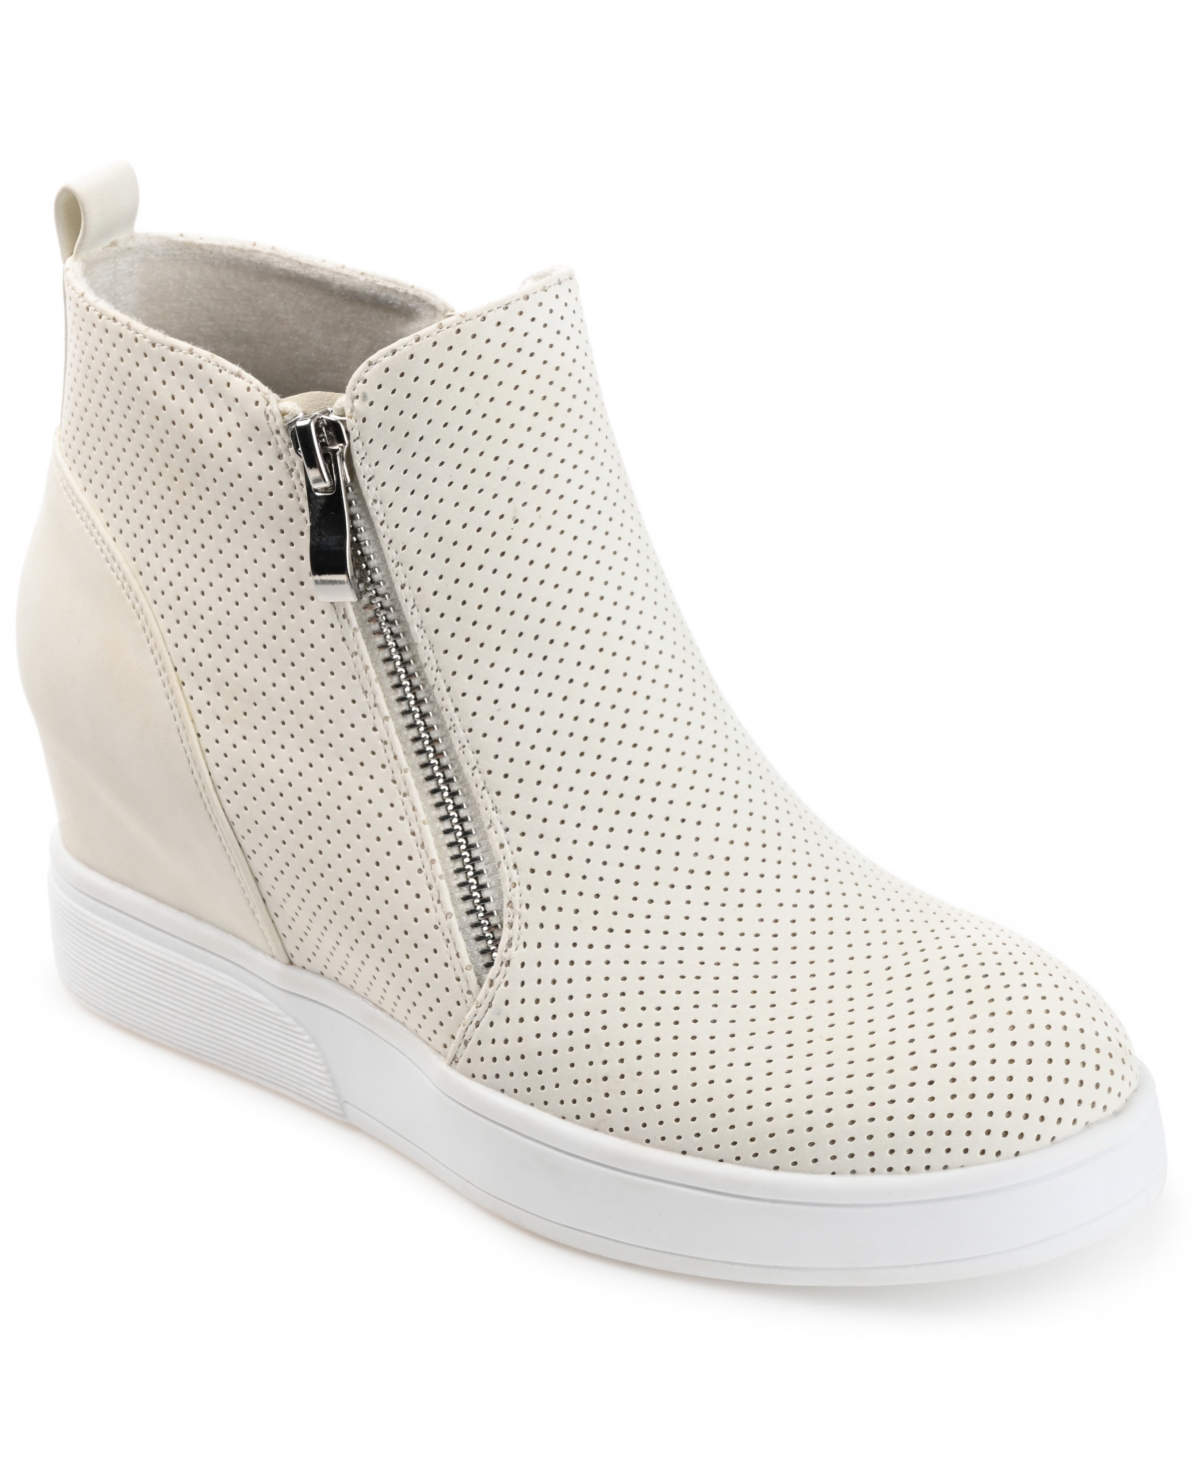 Women's Pennelope Wedge Sneakers - Taupe